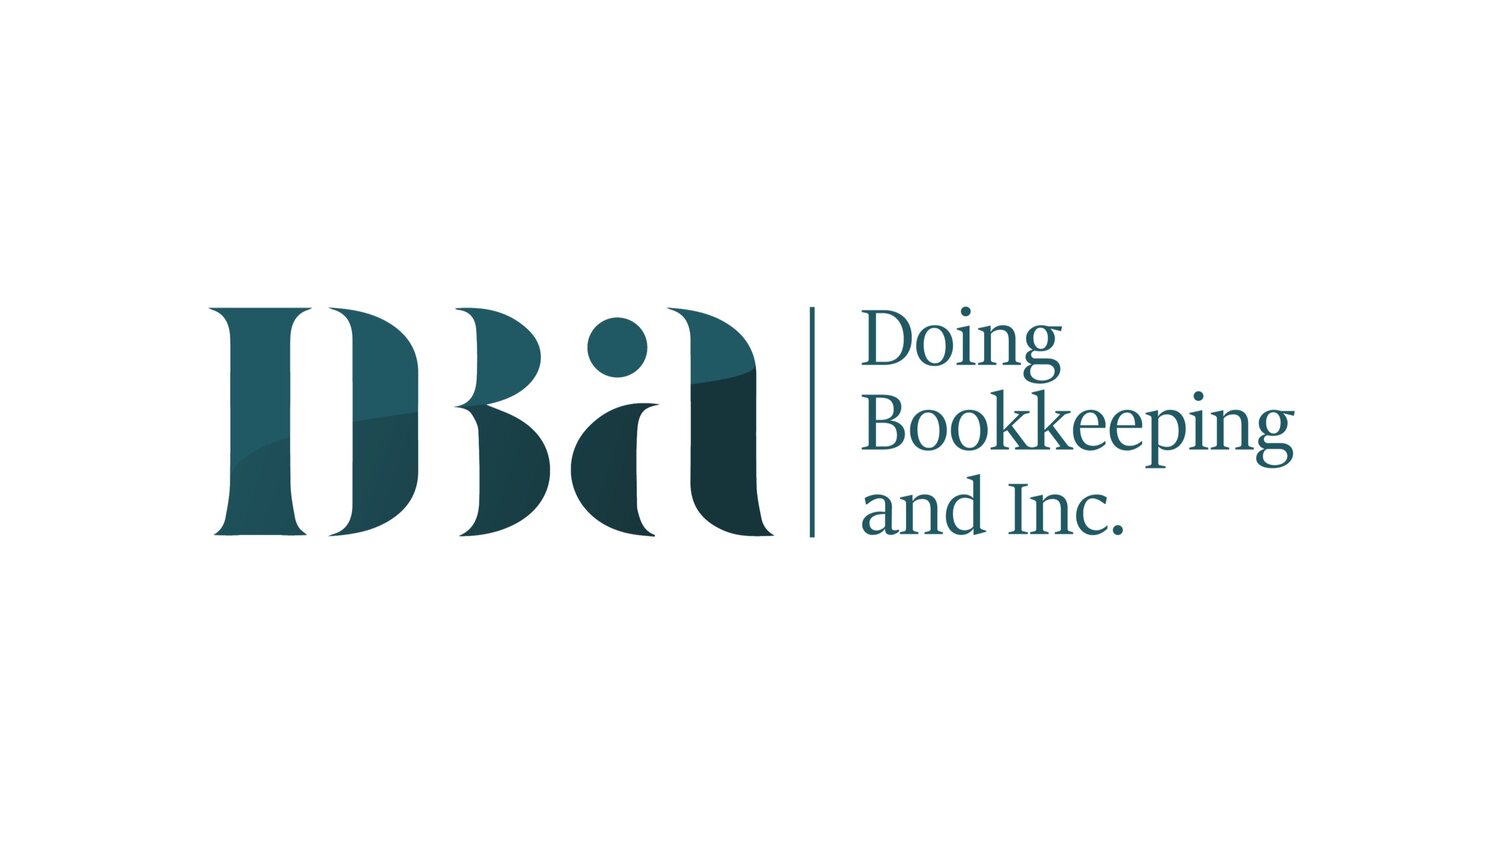 Doing Bookkeeping and Inc.